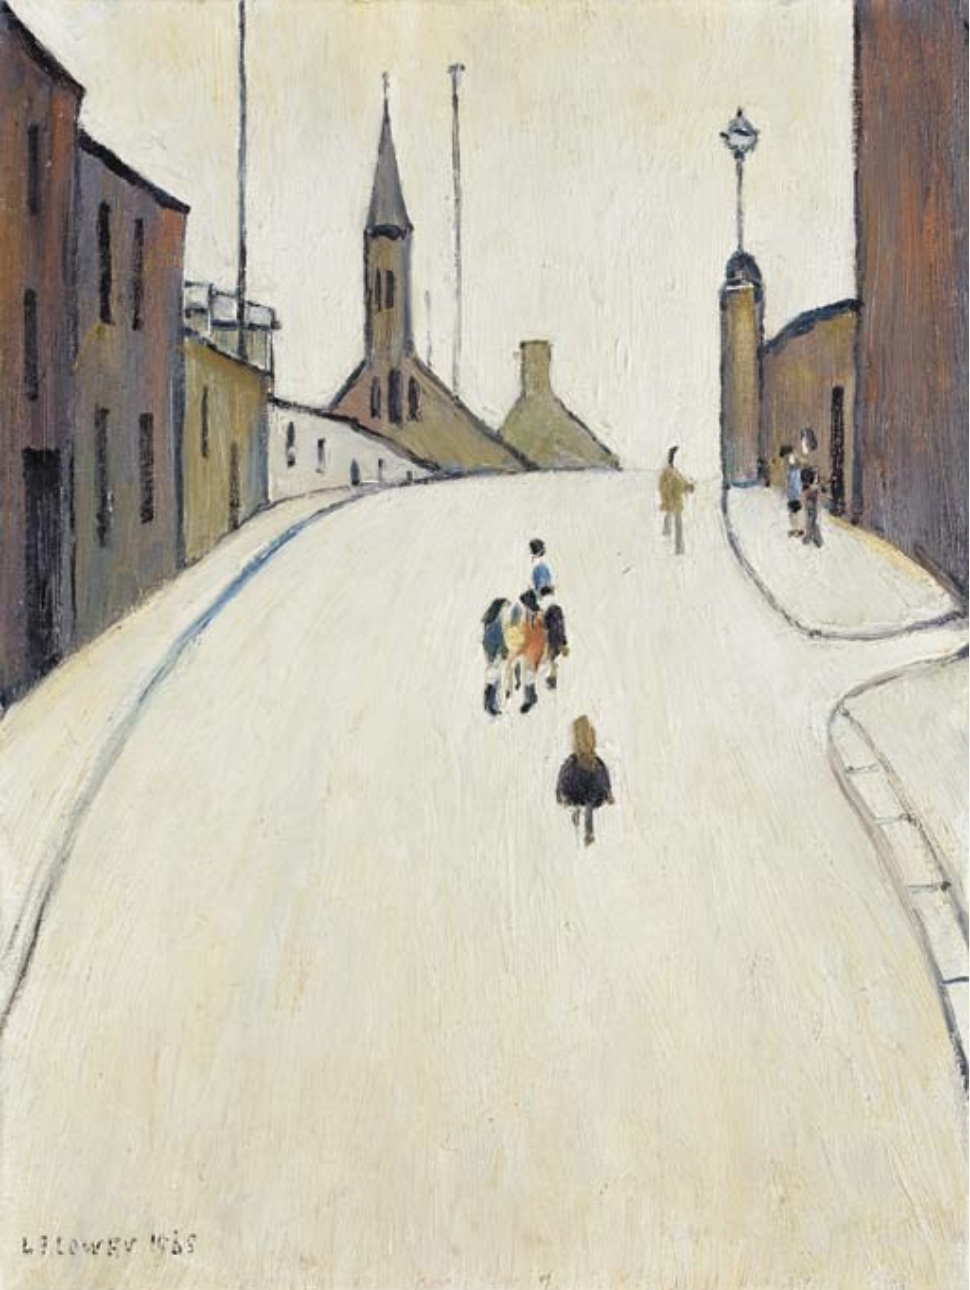 Street in Clitheroe (1965) by Laurence Stephen Lowry (1887 - 1976), English artist.